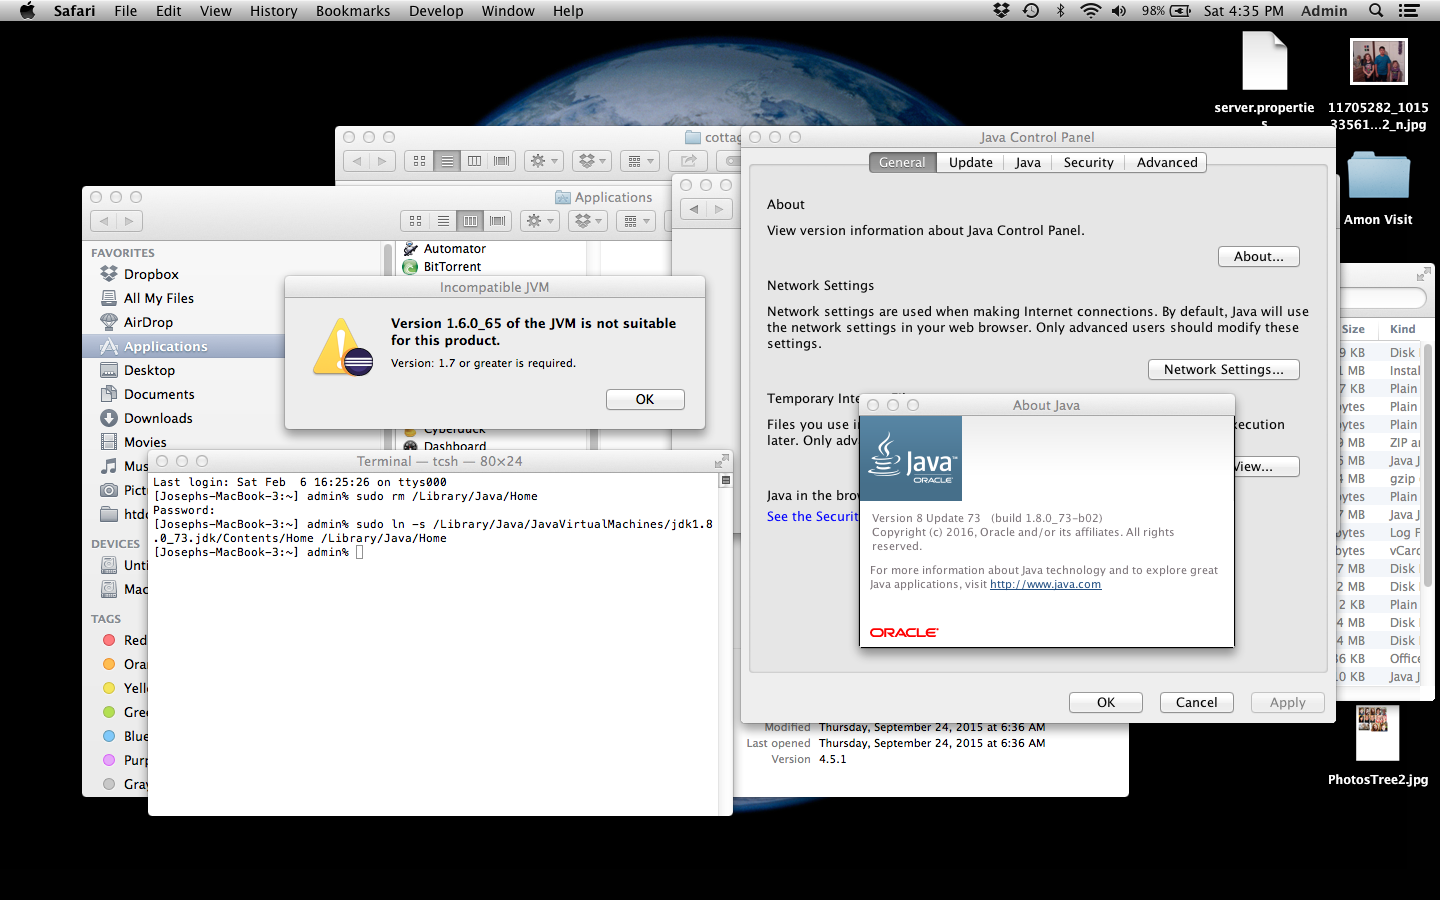 download eclipse java for mac os sierra